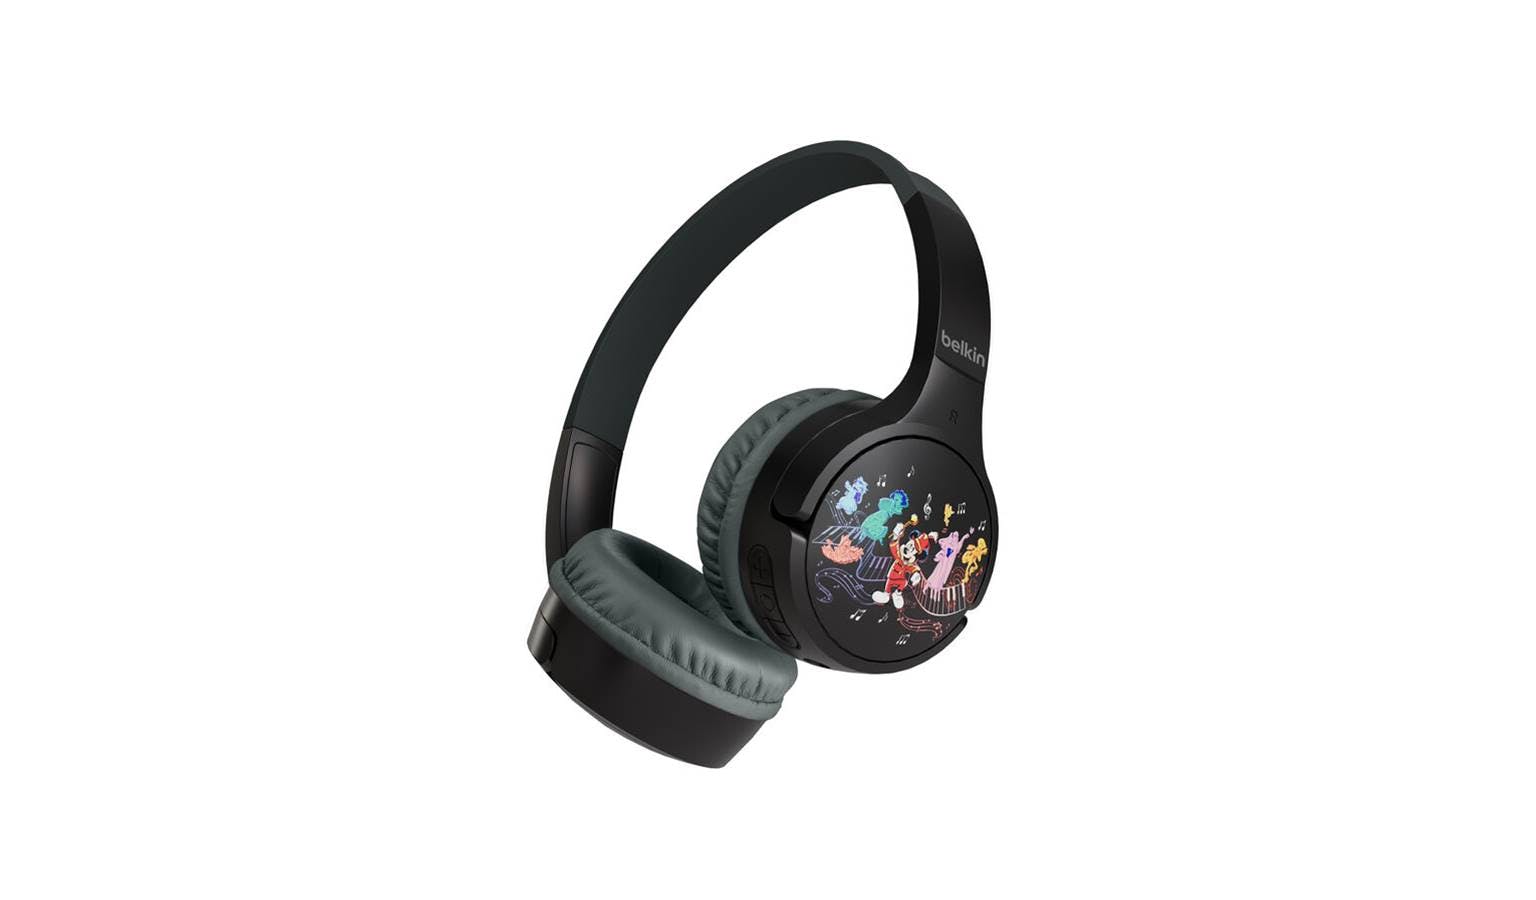 Wireless On-Ear Headphones for Kids (Disney Collection)